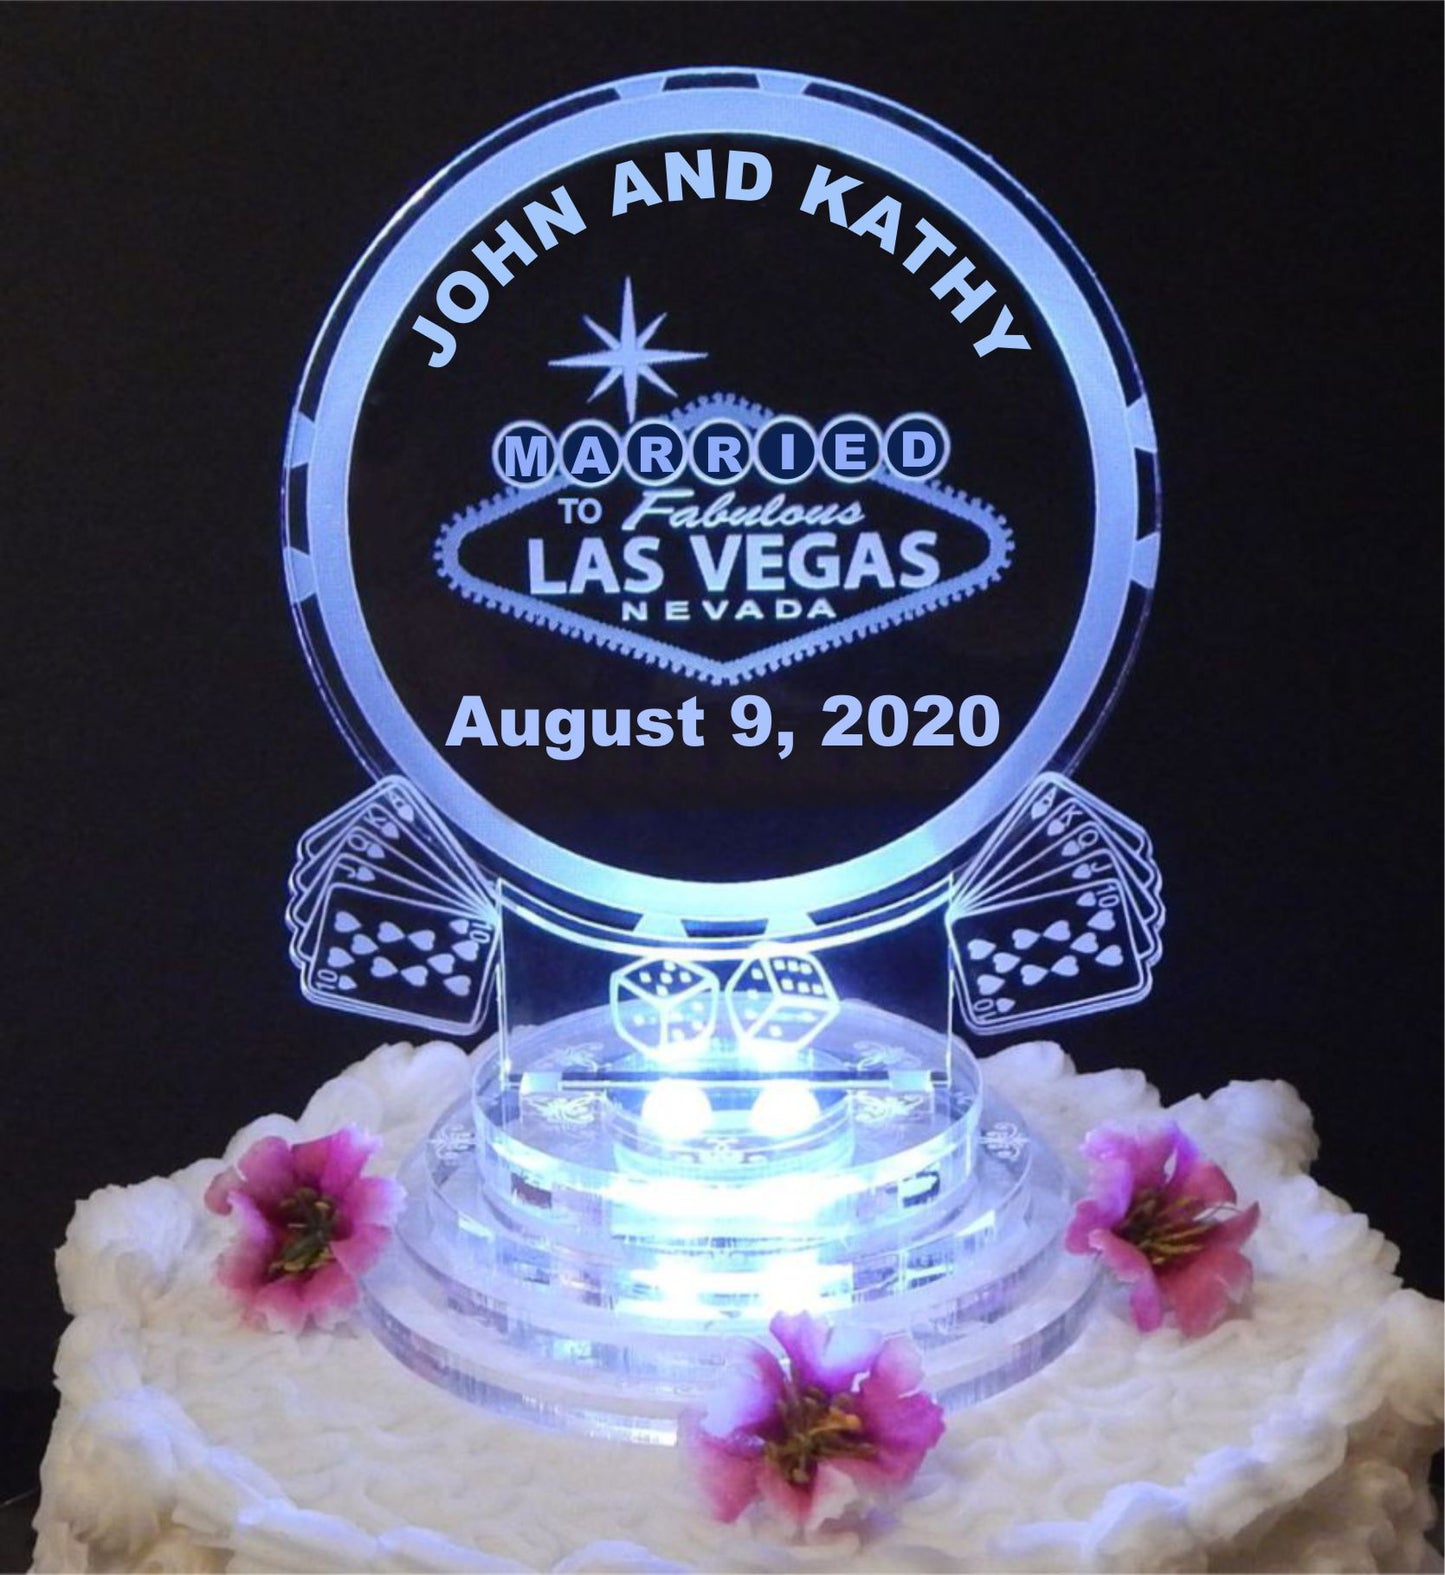 Lighted acrylic cake topper designed with Las Vegas poker chip, cards, dice along with names and date.